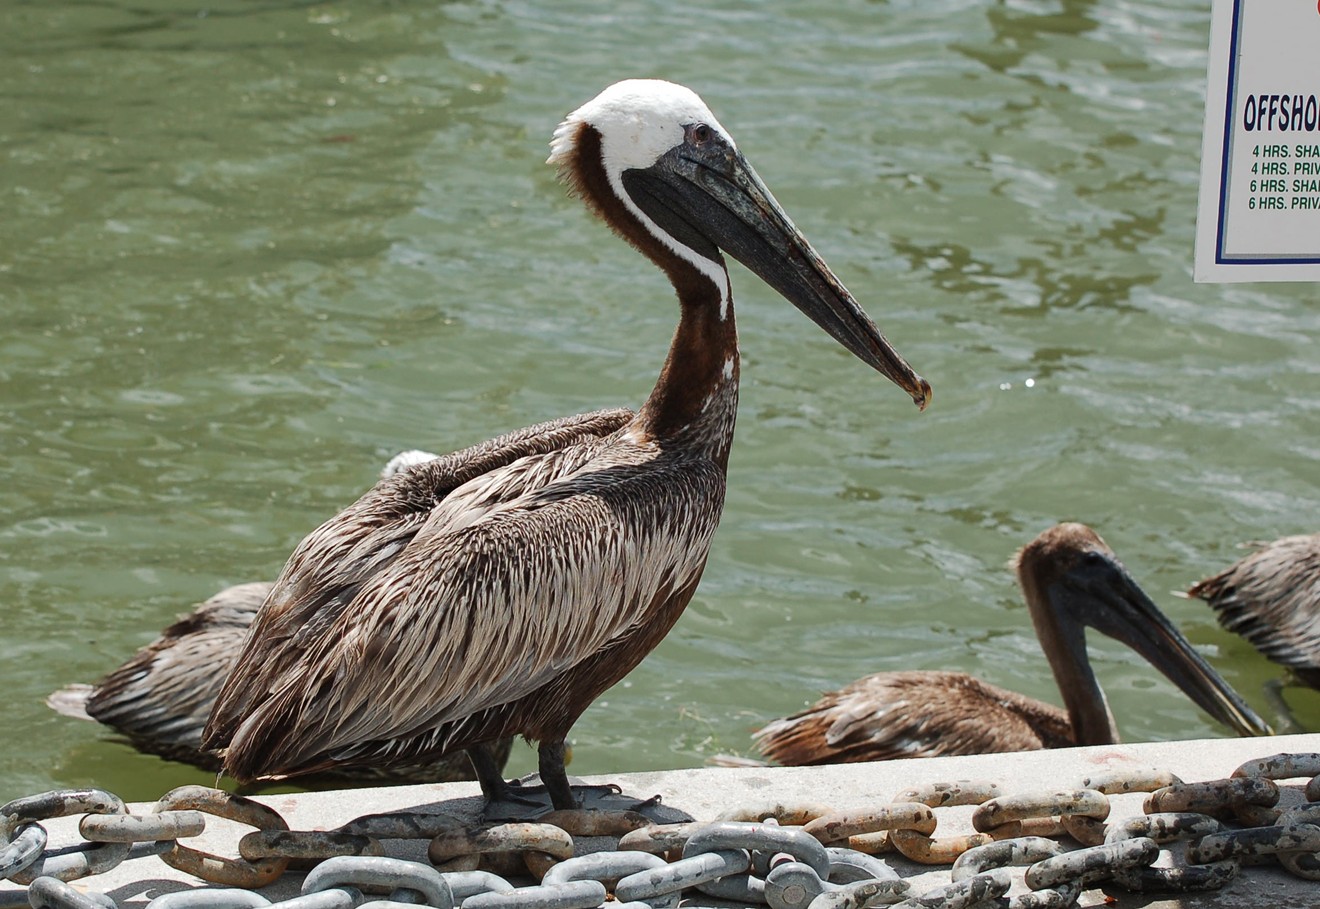 A brown pelican was found mutilated in Islamorada in early March.